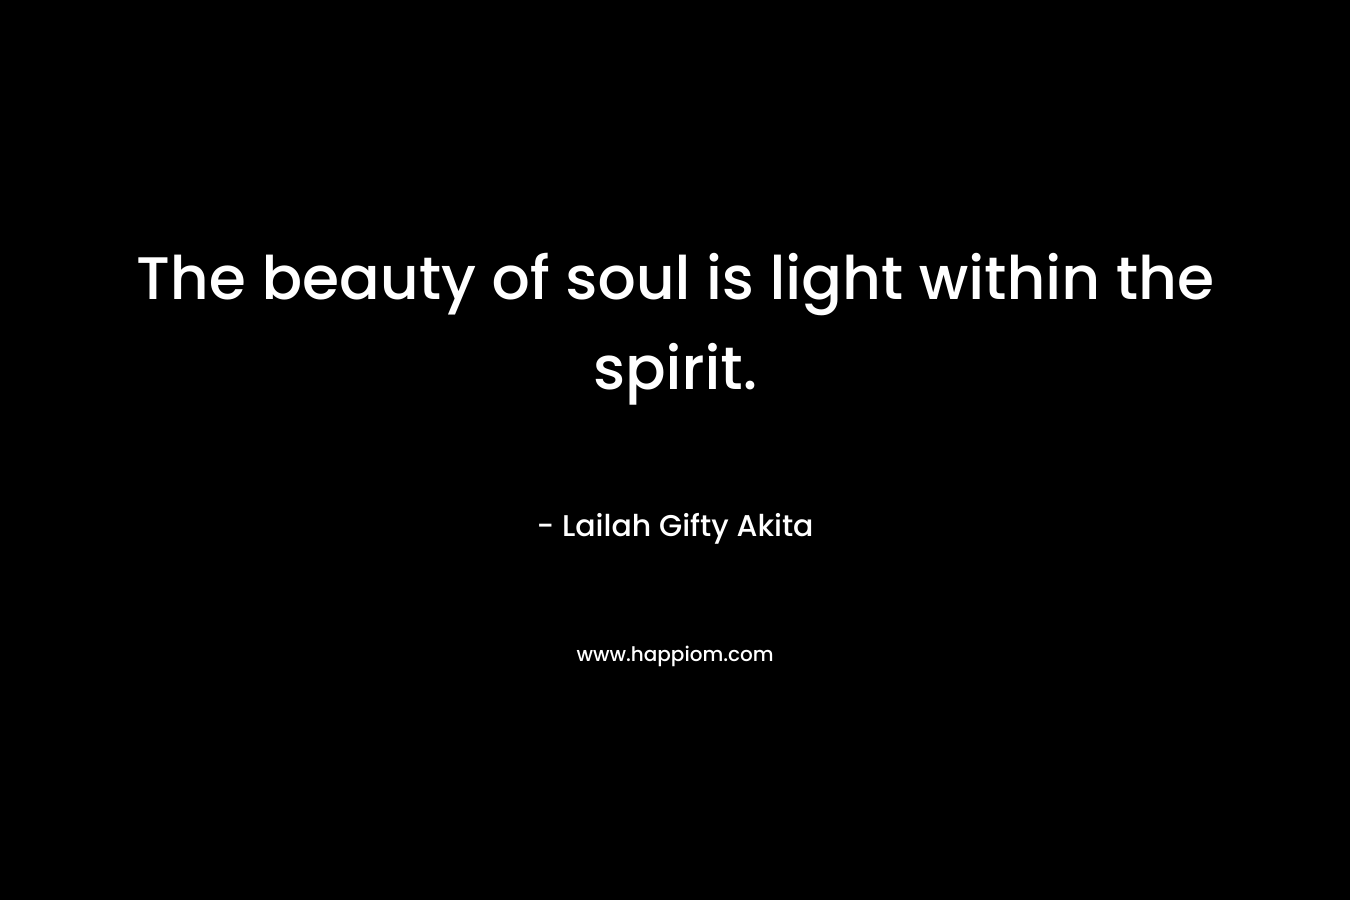 The beauty of soul is light within the spirit.